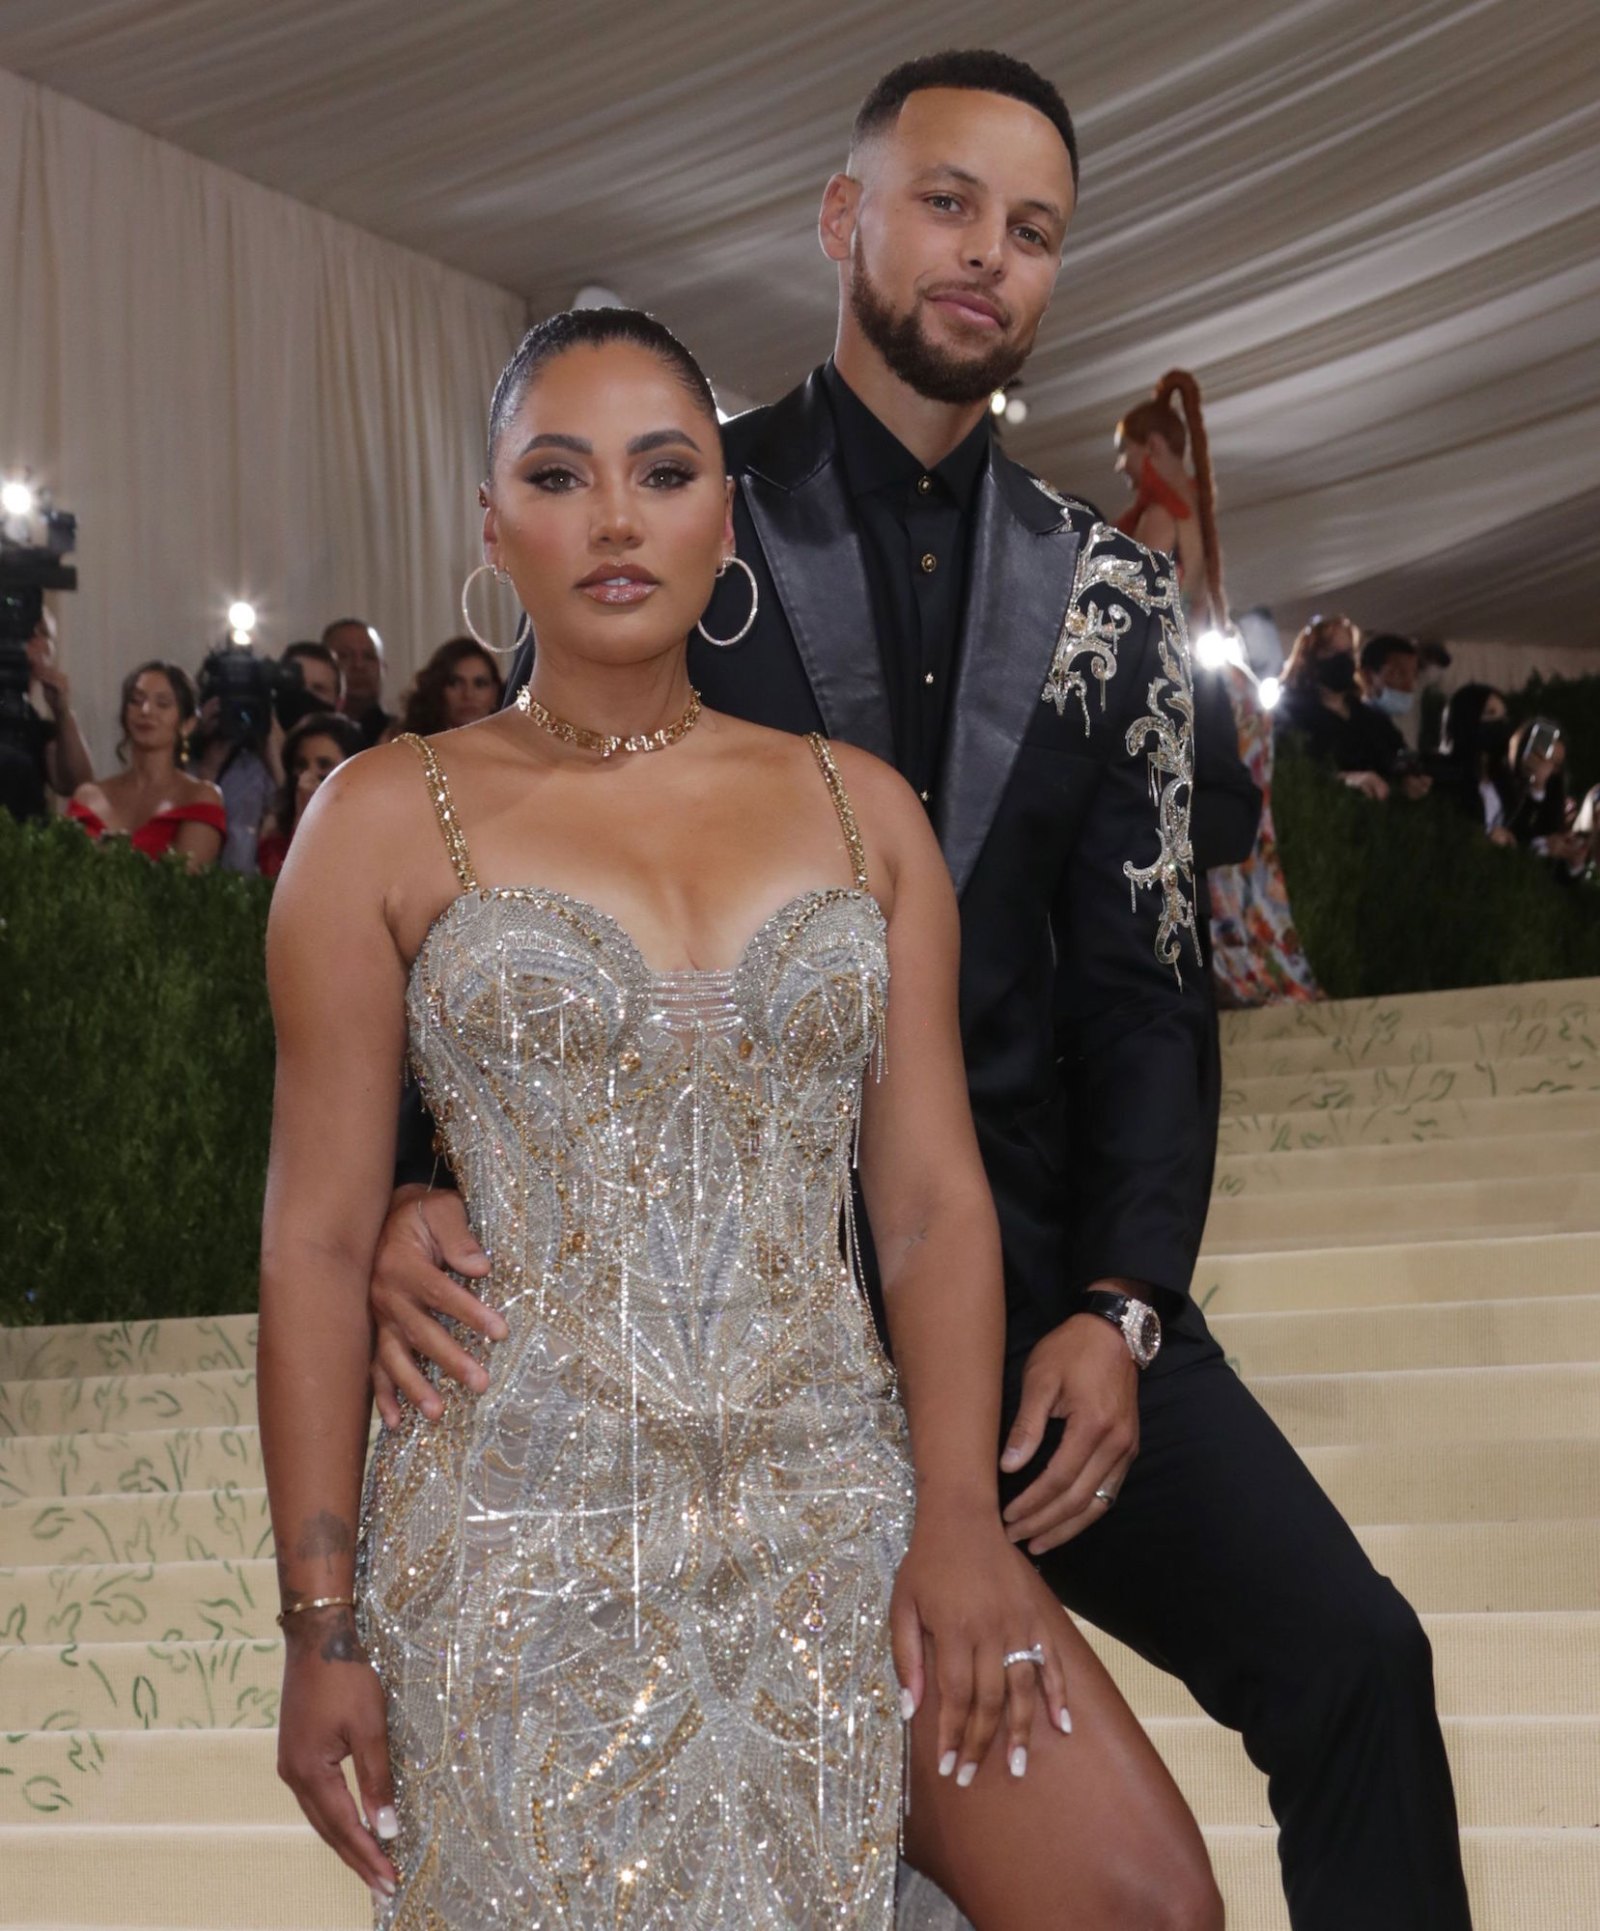 'Smitten'! Stephen Curry Surprises Wife Ayesha With Vow Renewal Ceremony